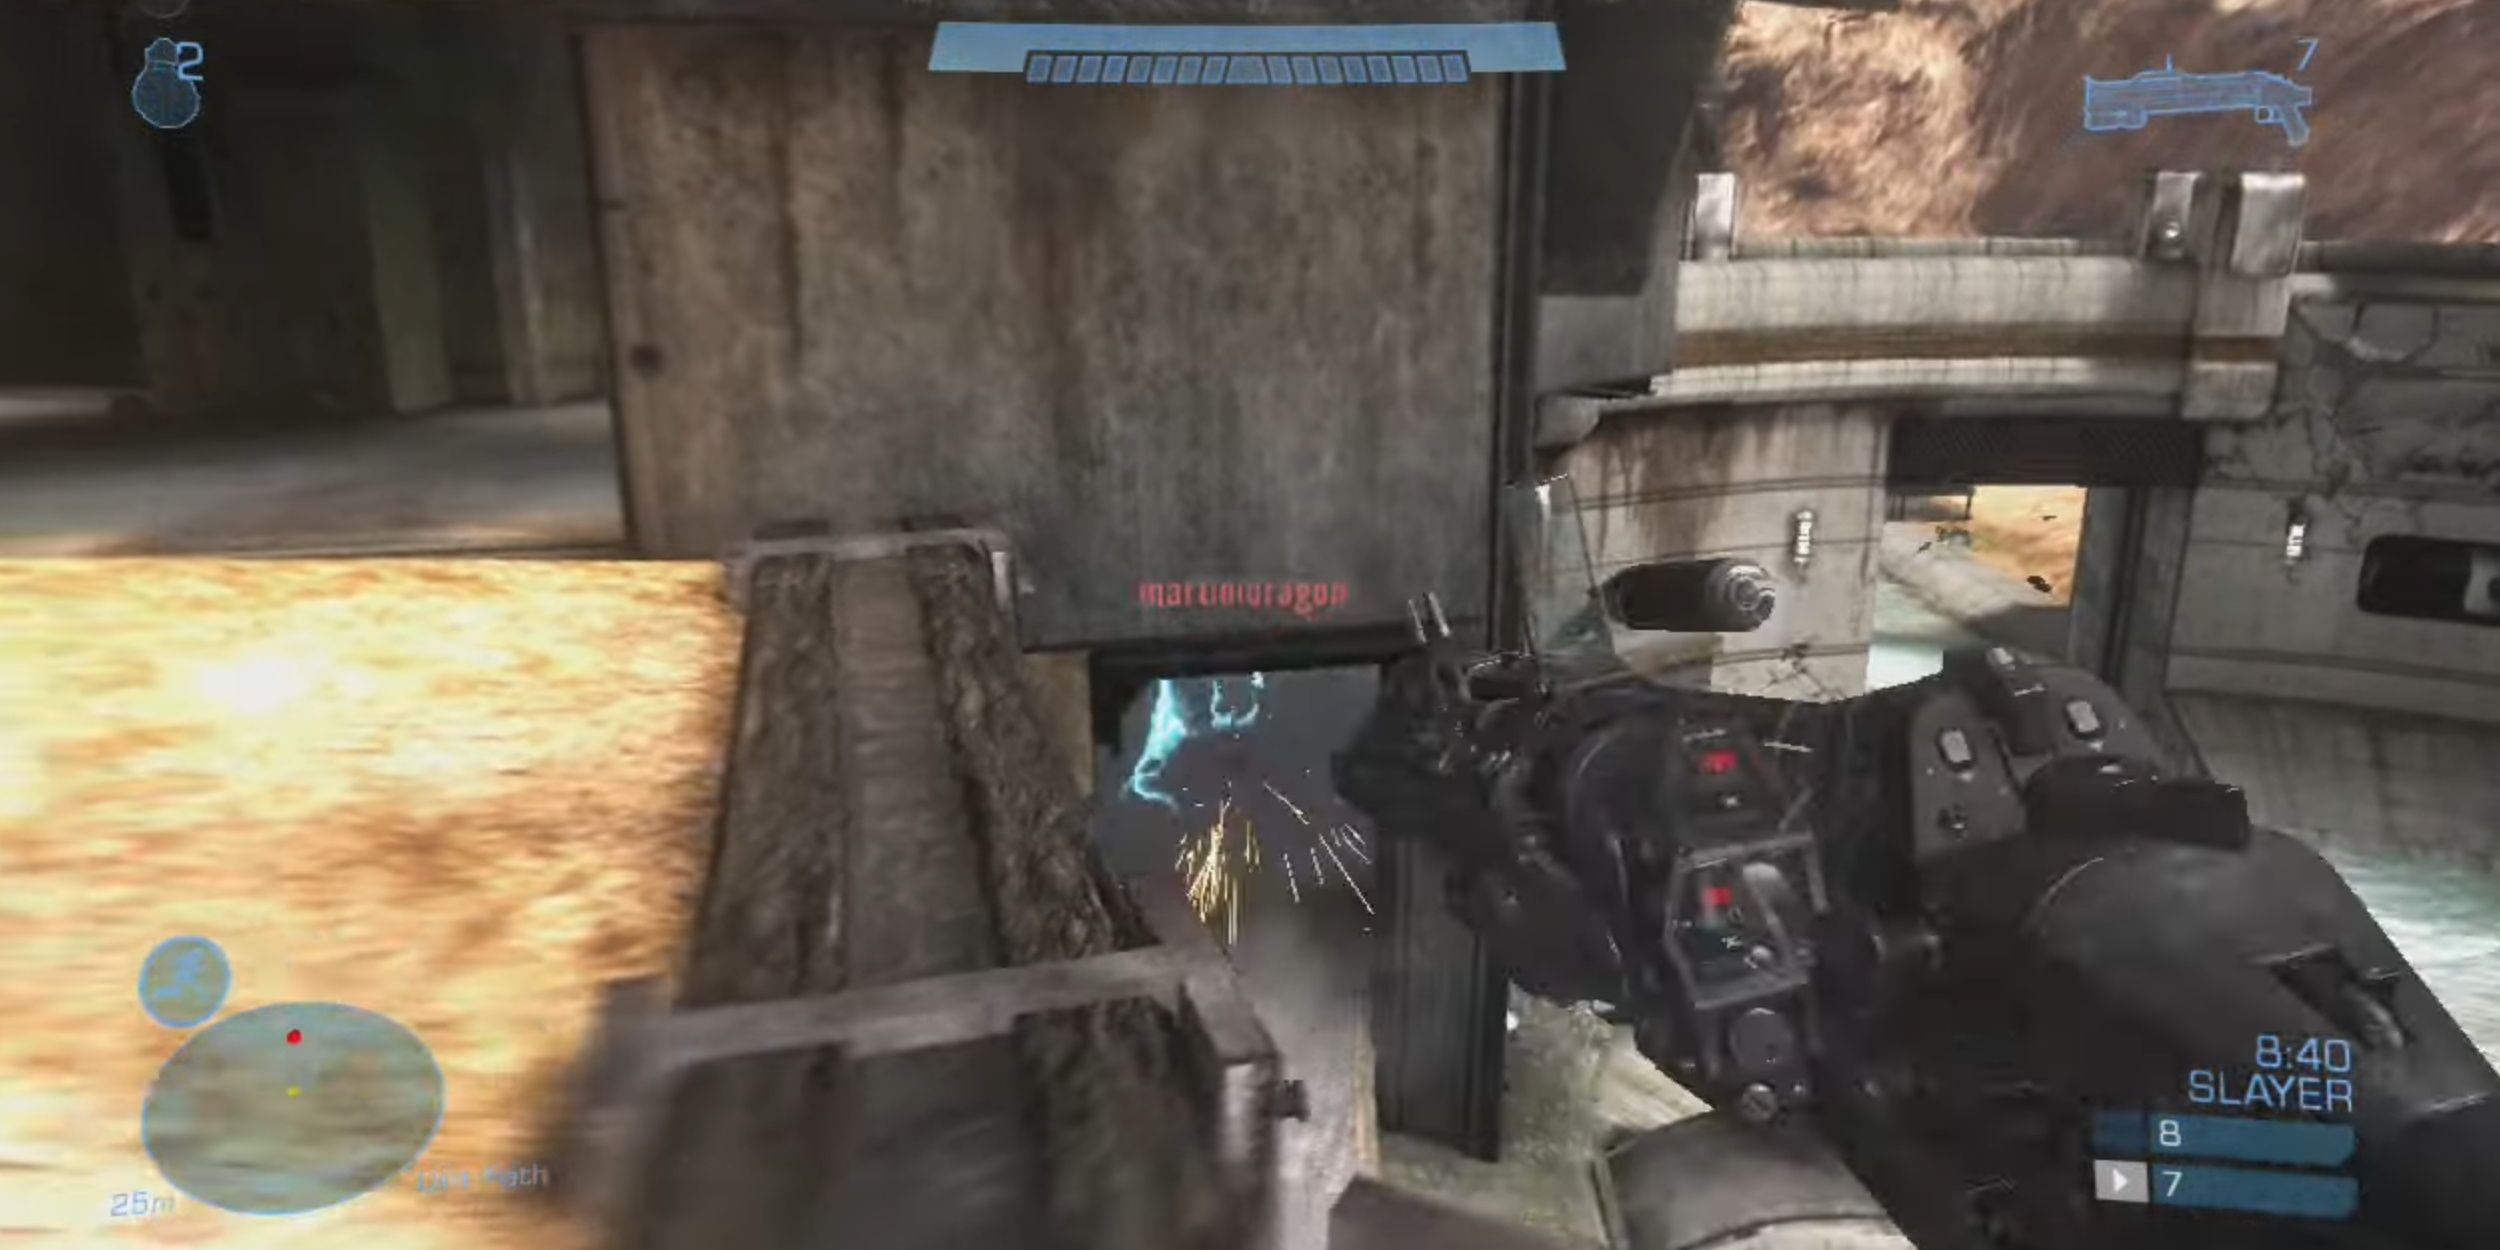 The Grenade Launcher launches a grenade into a hallway, killing an enemy